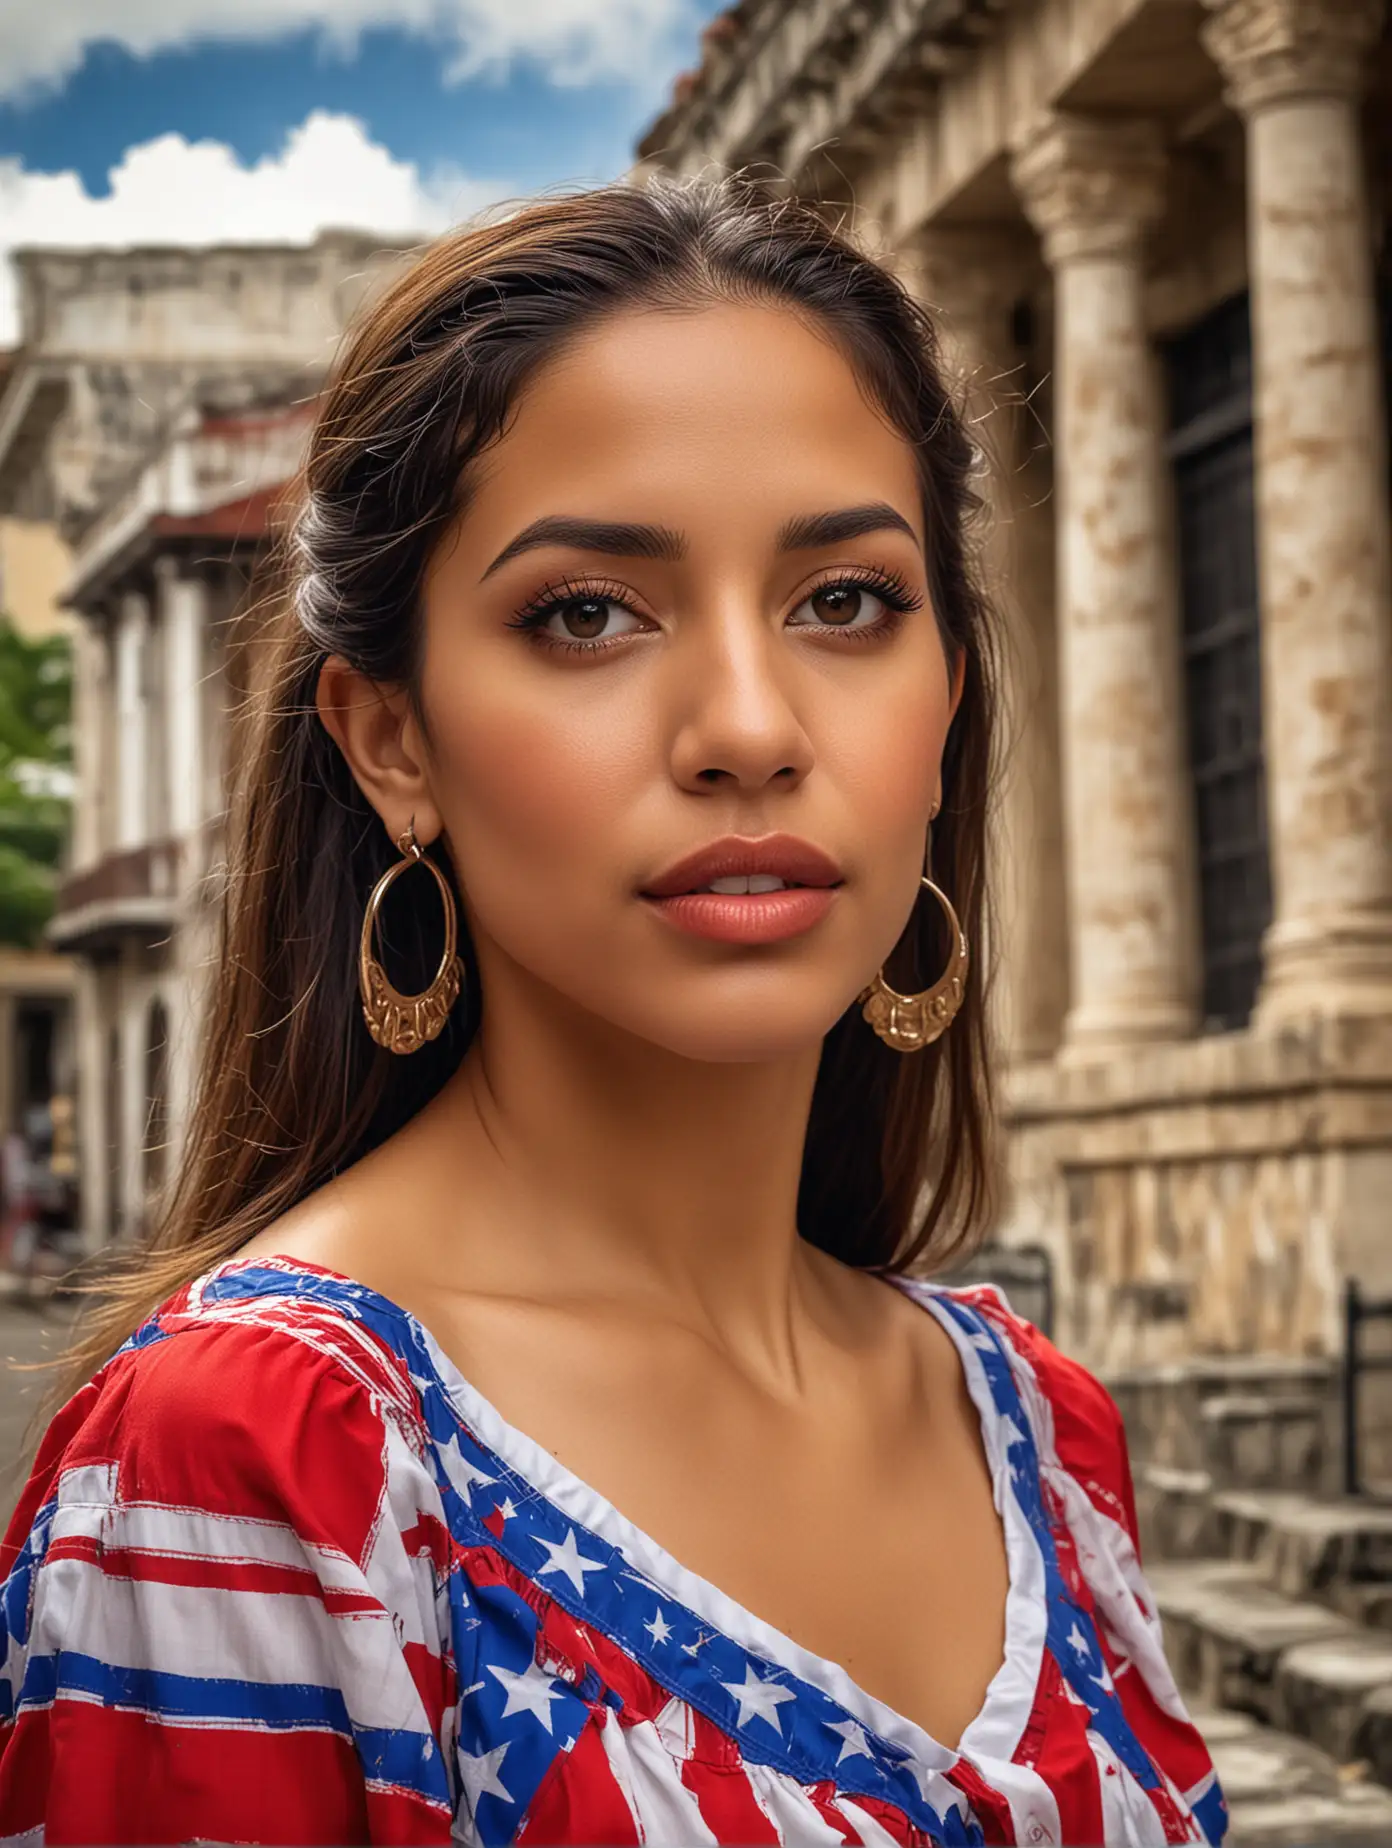 A beautiful woman，Puerto Rican，Wearing Puerto Rican clothing， with exquisite facial features, Famous architectural background of Puerto Rican， professional photography technology, 